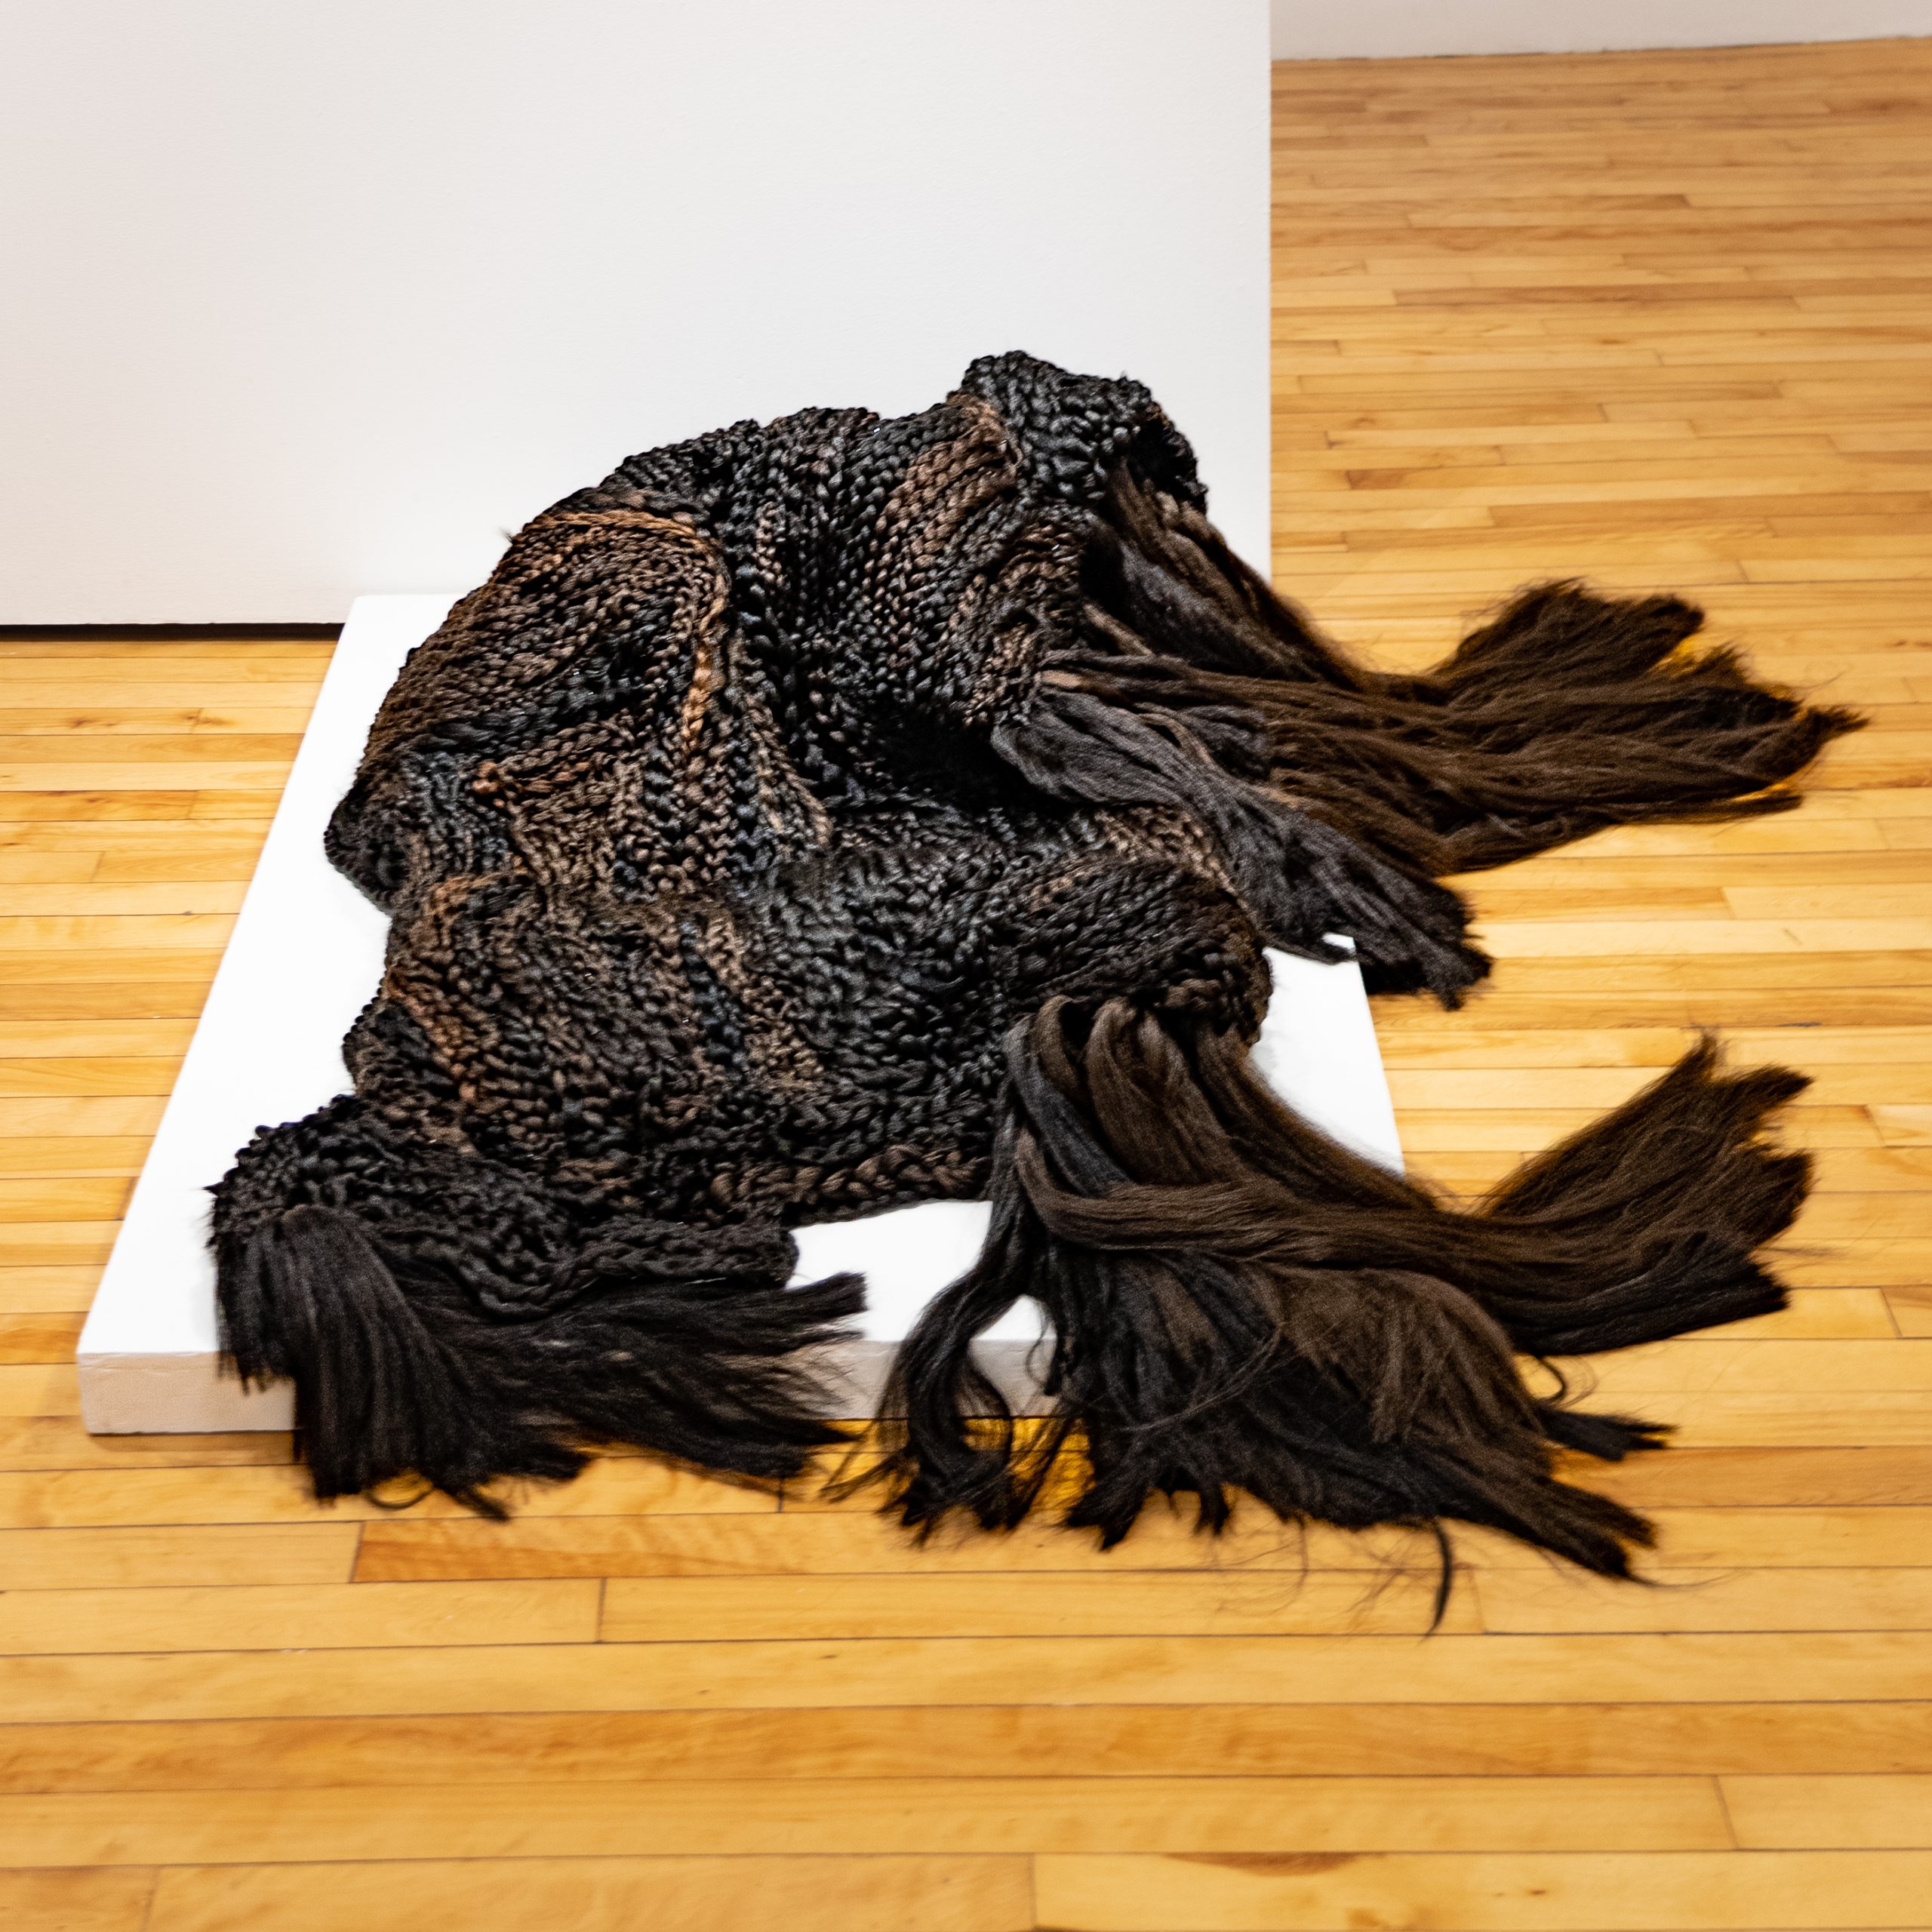 Veronica A. Perez, "you see, eventually, everything fades away," 2023. Artificial hair, bobby pins, 21 in. wide x 74 ½ in. long x 36 in. Part of shadow / echo / memory at the University of Southern Maine Art Gallery, 2023.